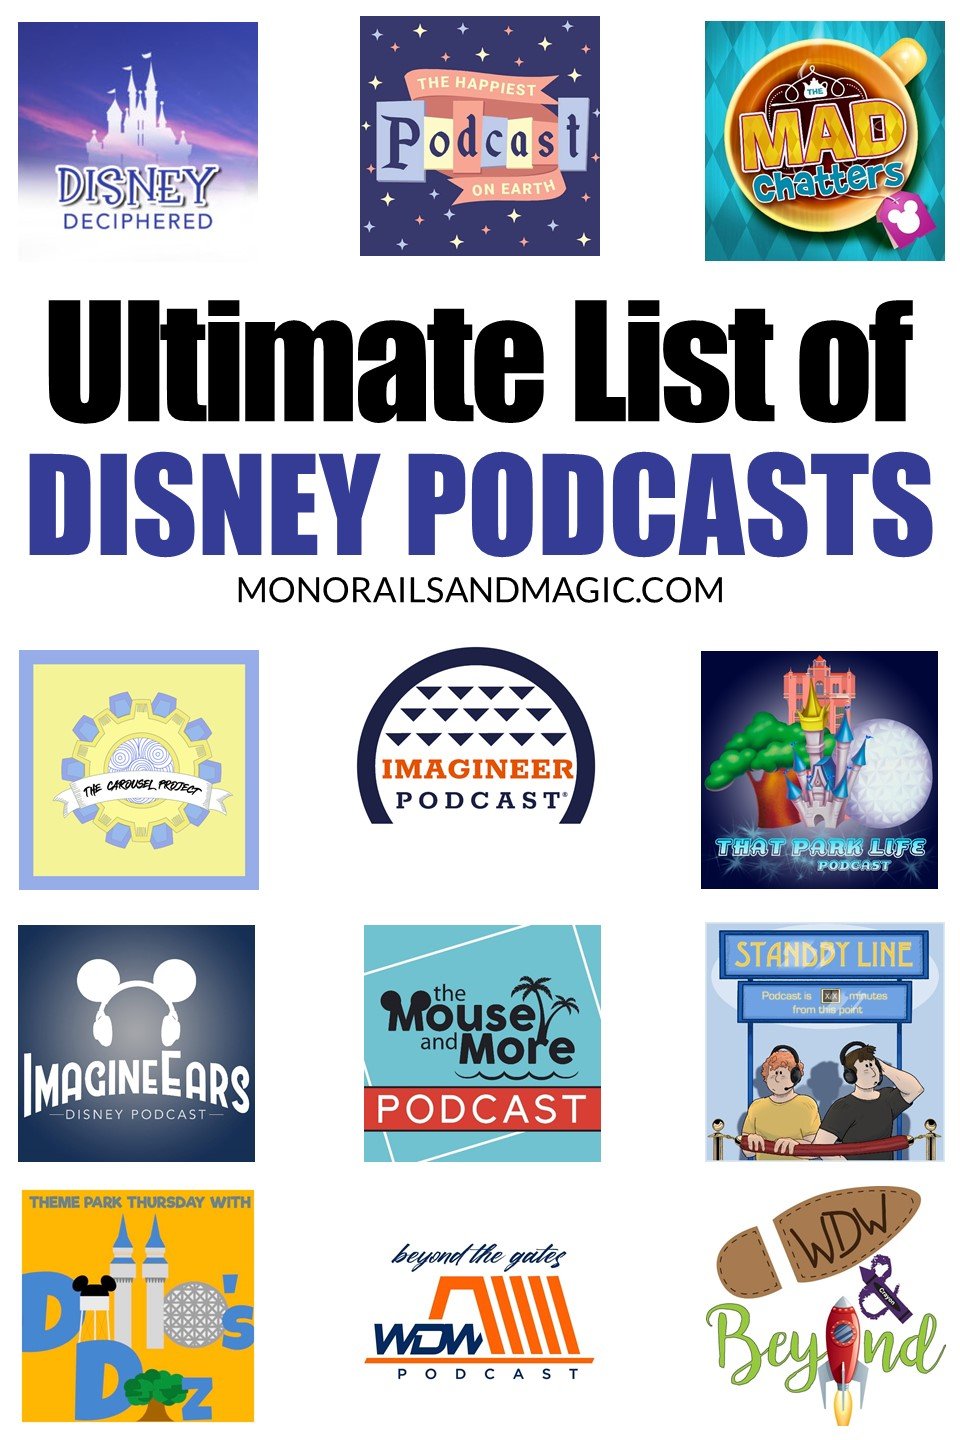 70+ podcasts for Disney fans.